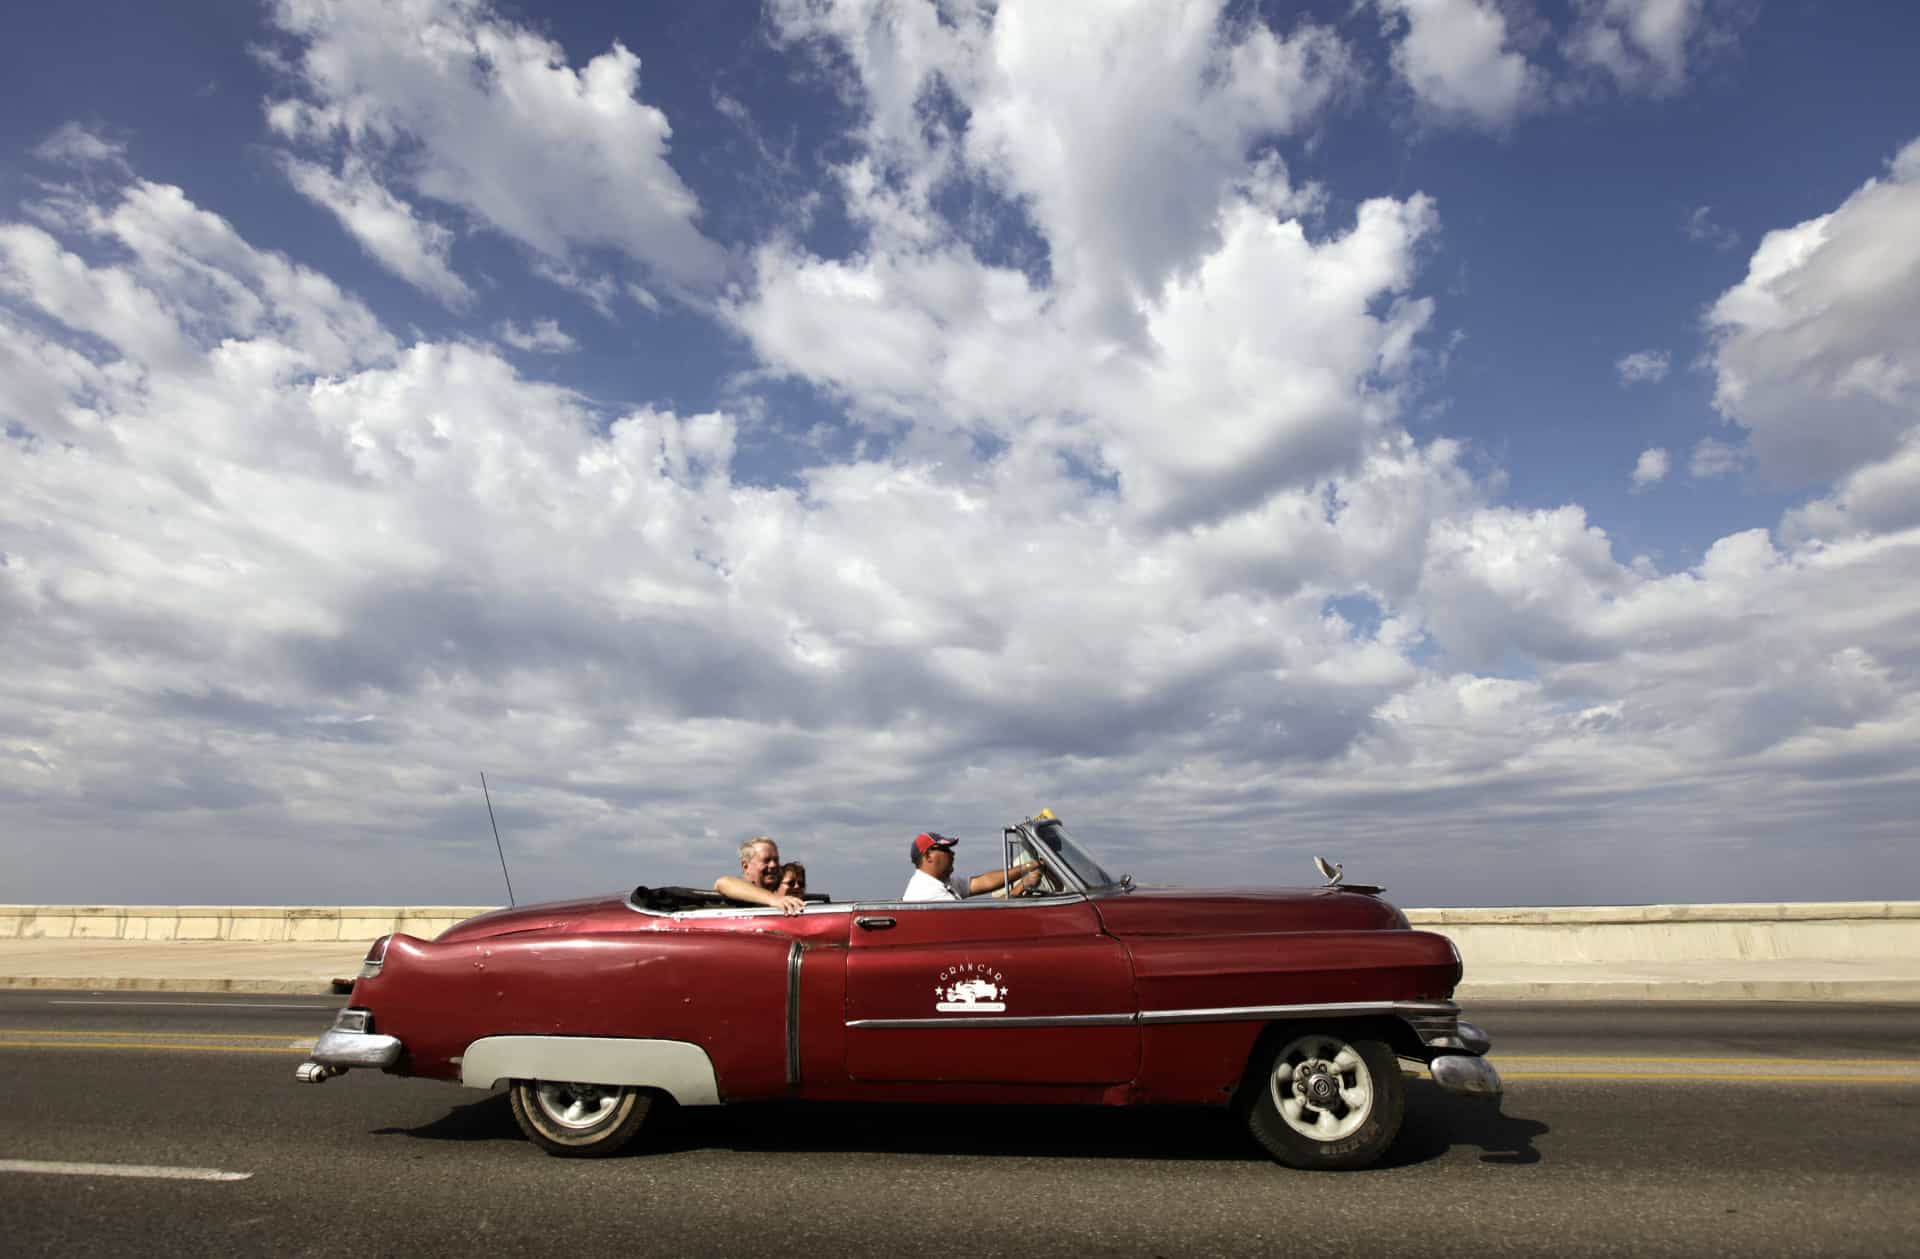 Tourists drive around in a 1952 convertible Cadillac.